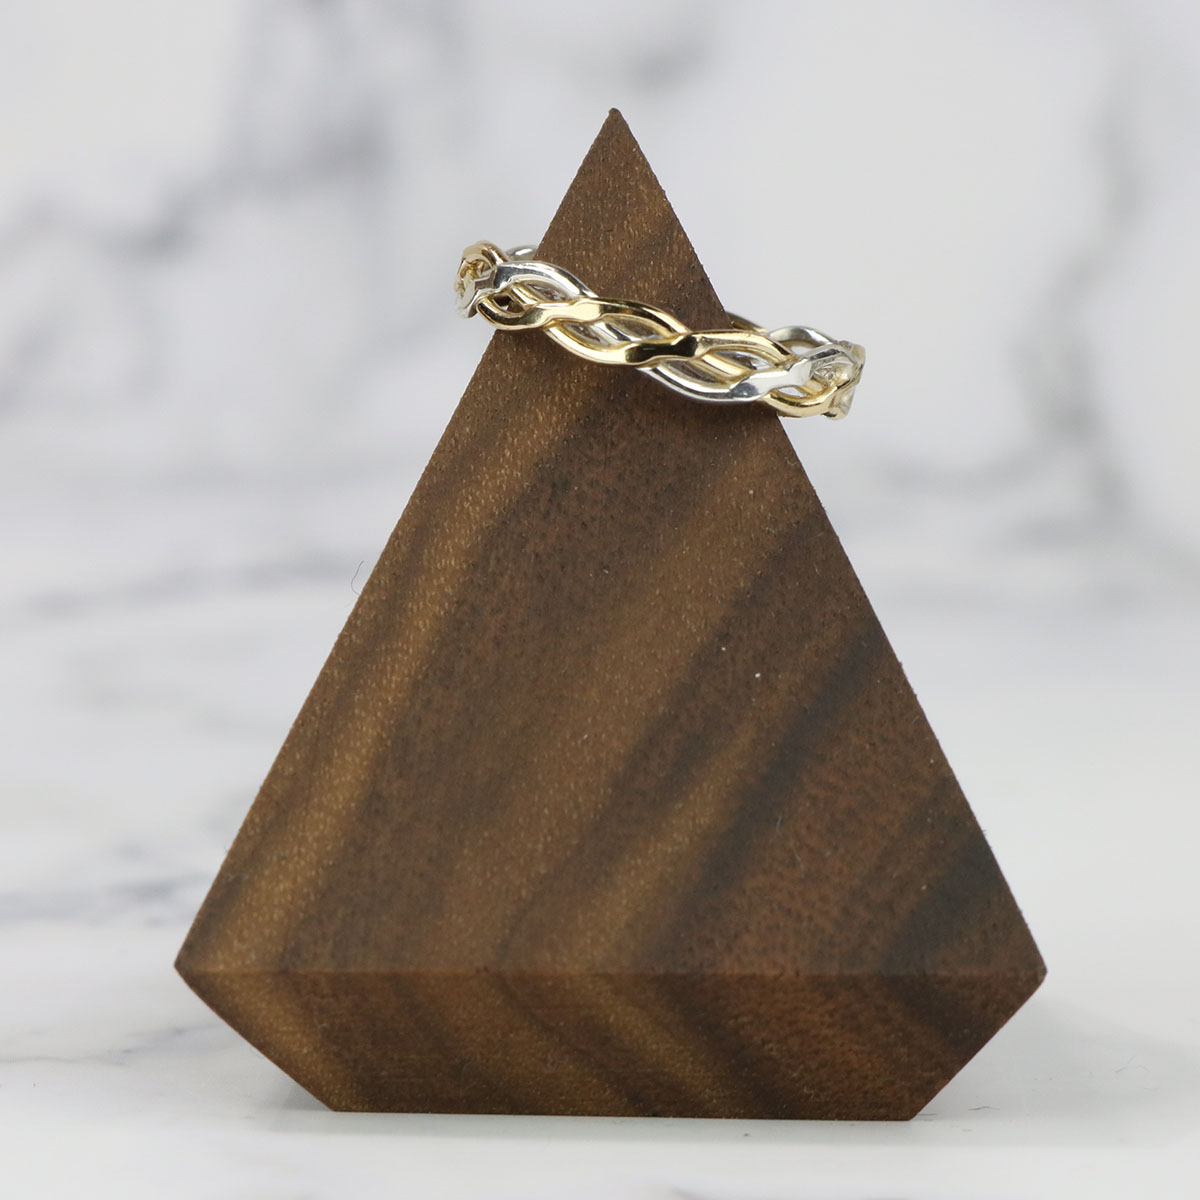 A Celtic Wedding Band on a wooden triangle for display. It is a two-metal Celtic knot design.